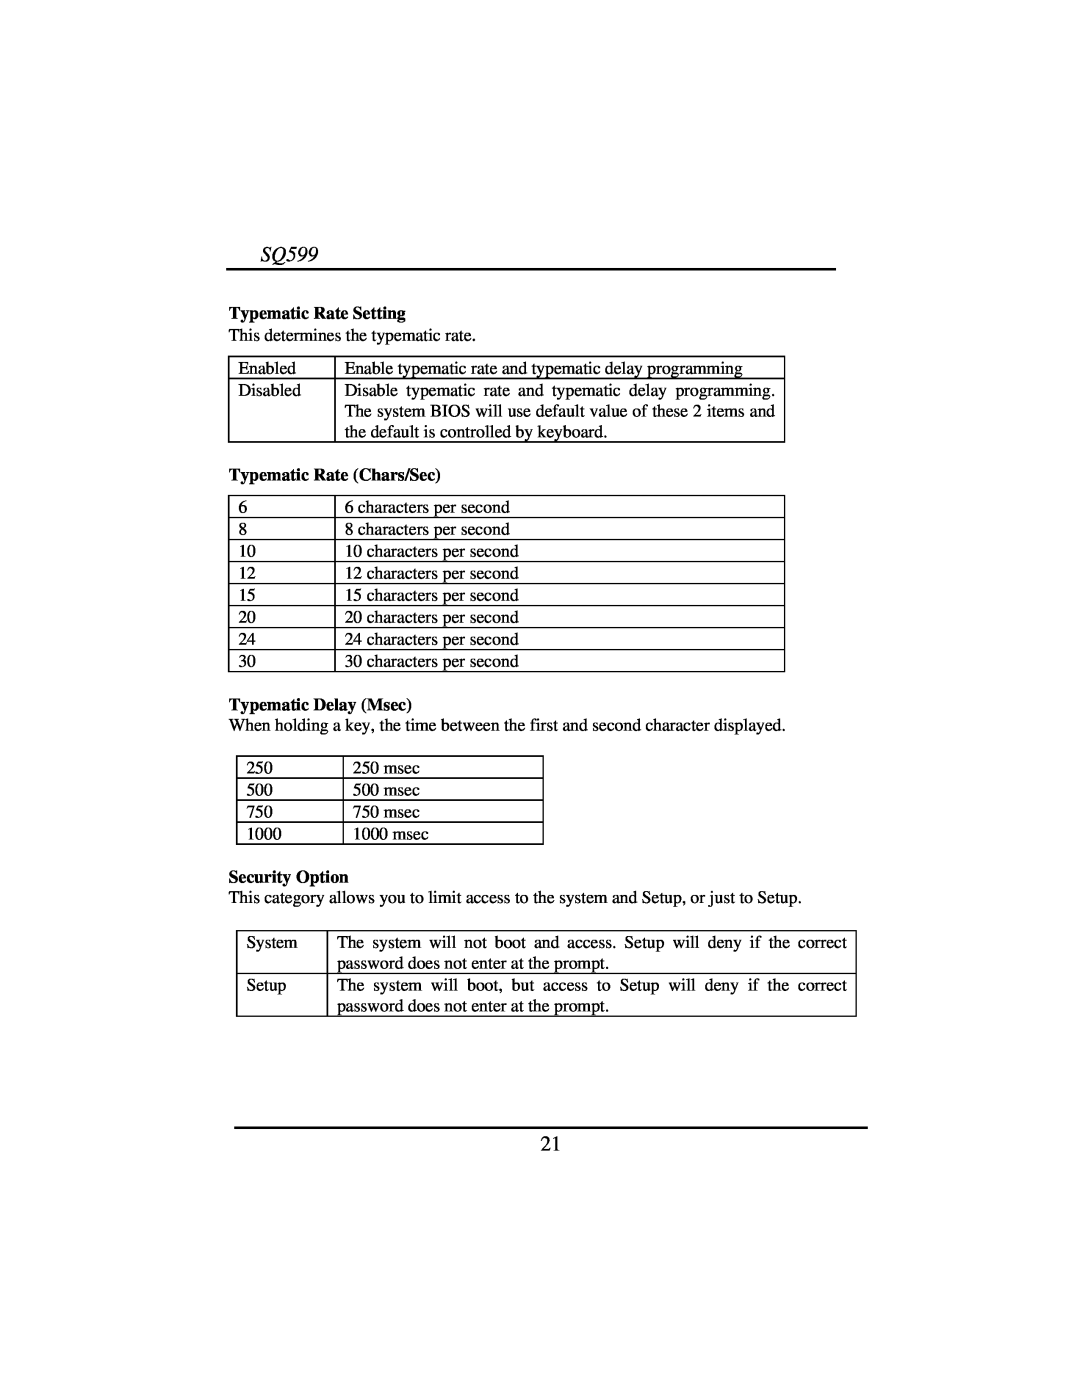 Intel SQ599 manual Typematic Rate Setting, Typematic Rate Chars/Sec, Typematic Delay Msec, Security Option 